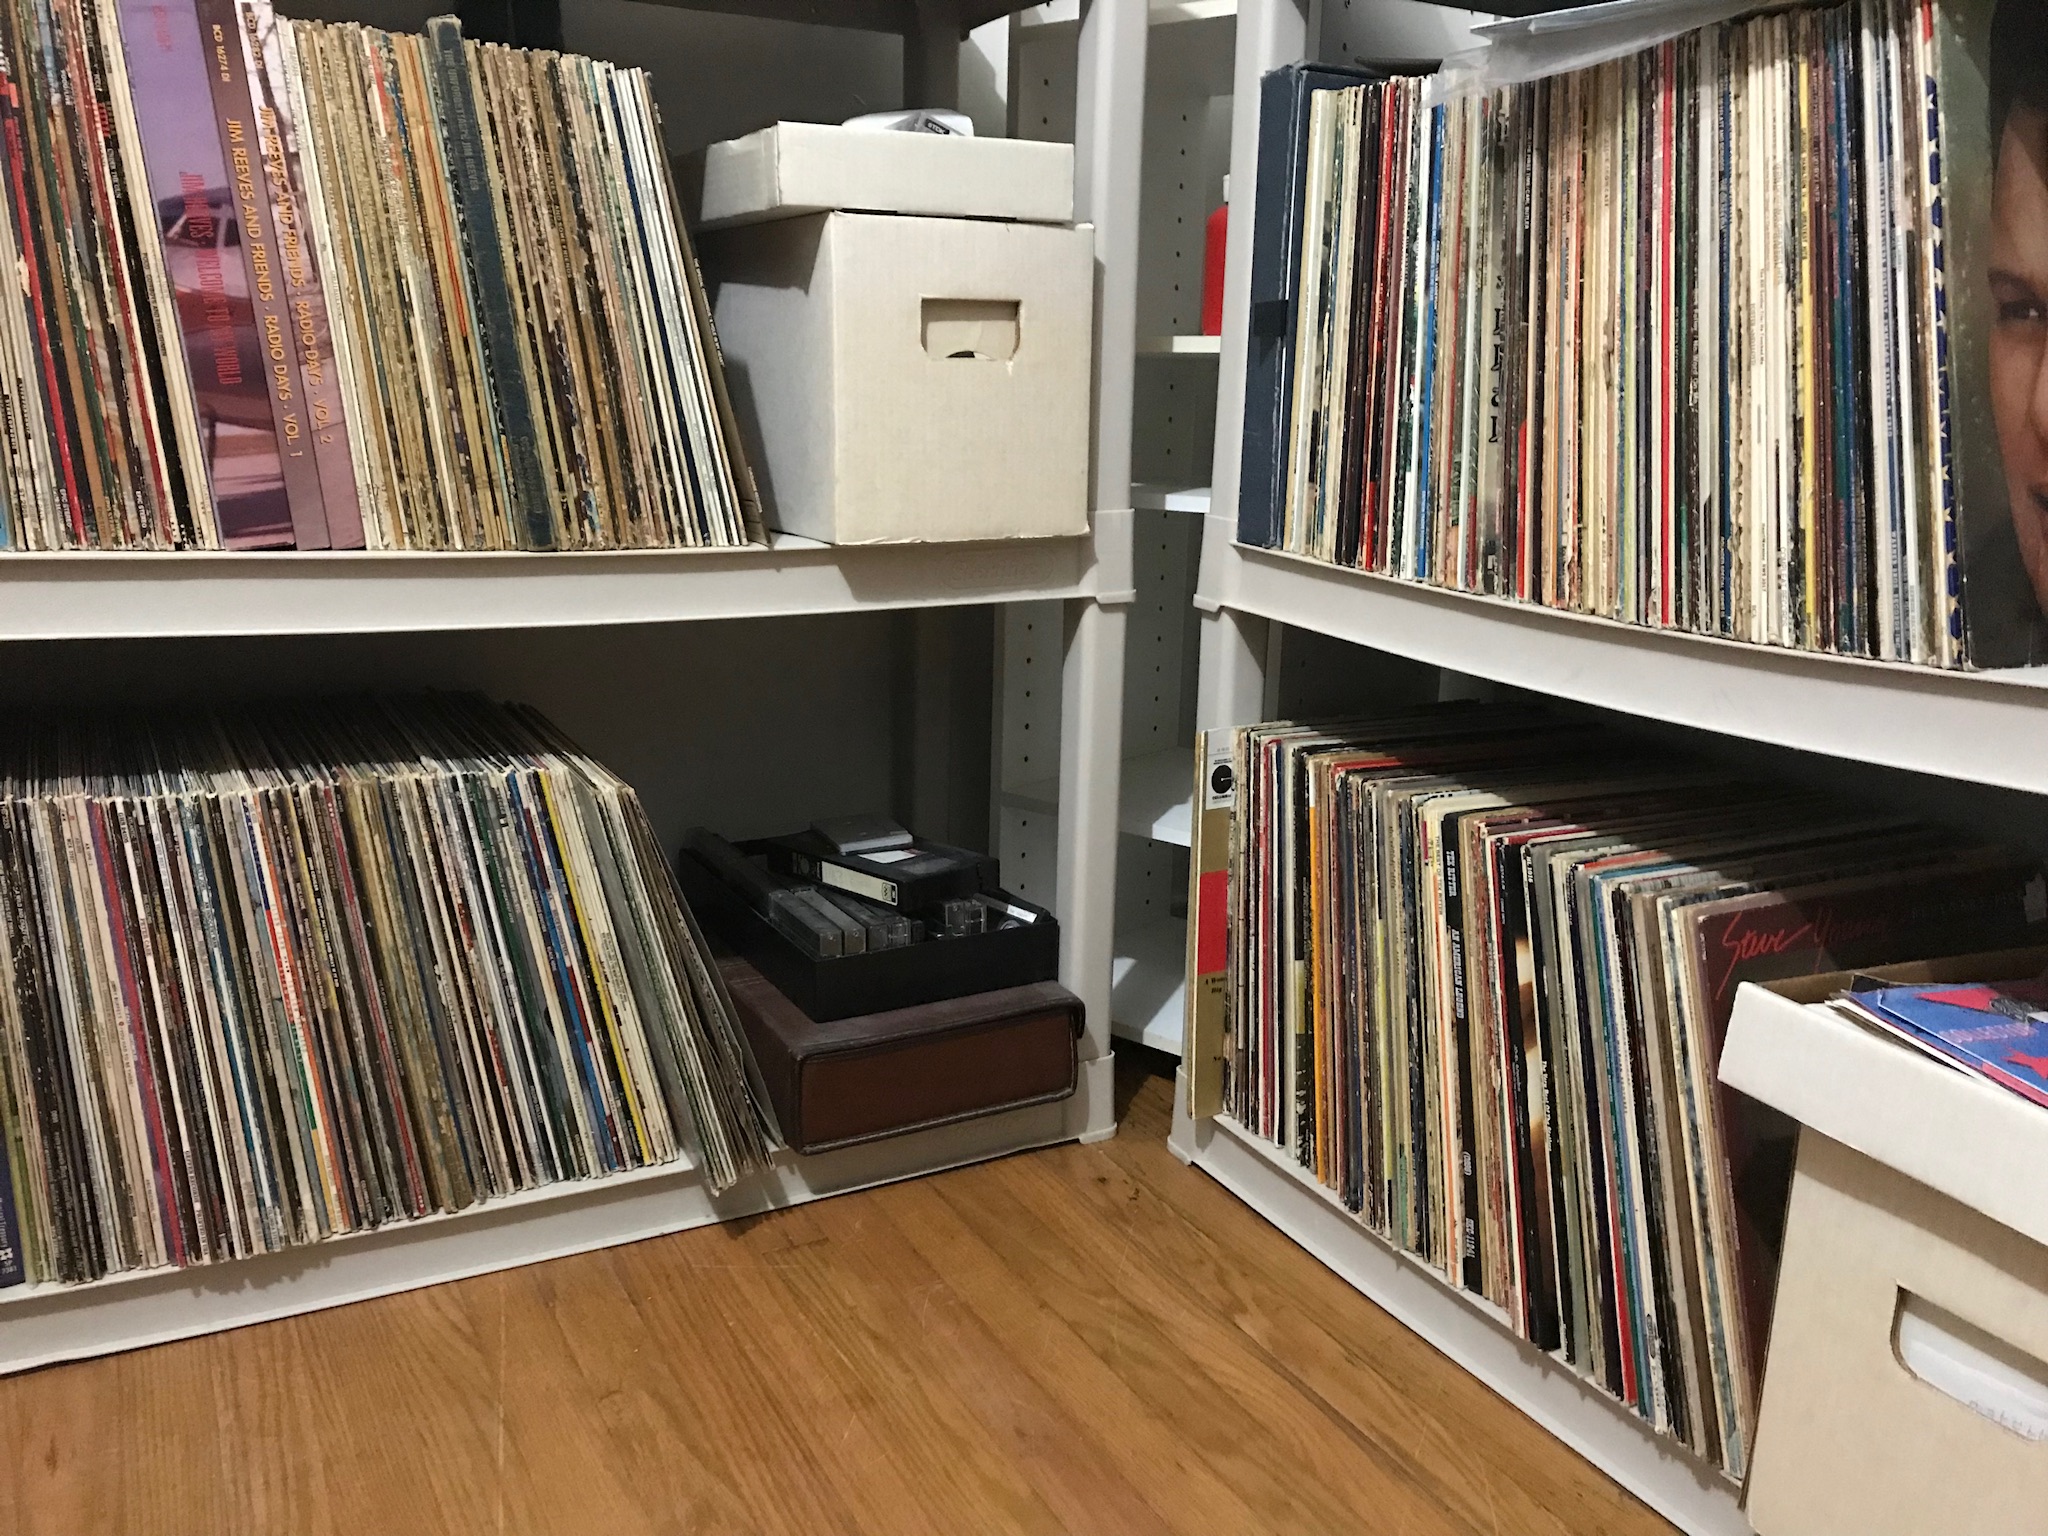 My piddly record collection.  Photo taken by and the property of FourWalls.